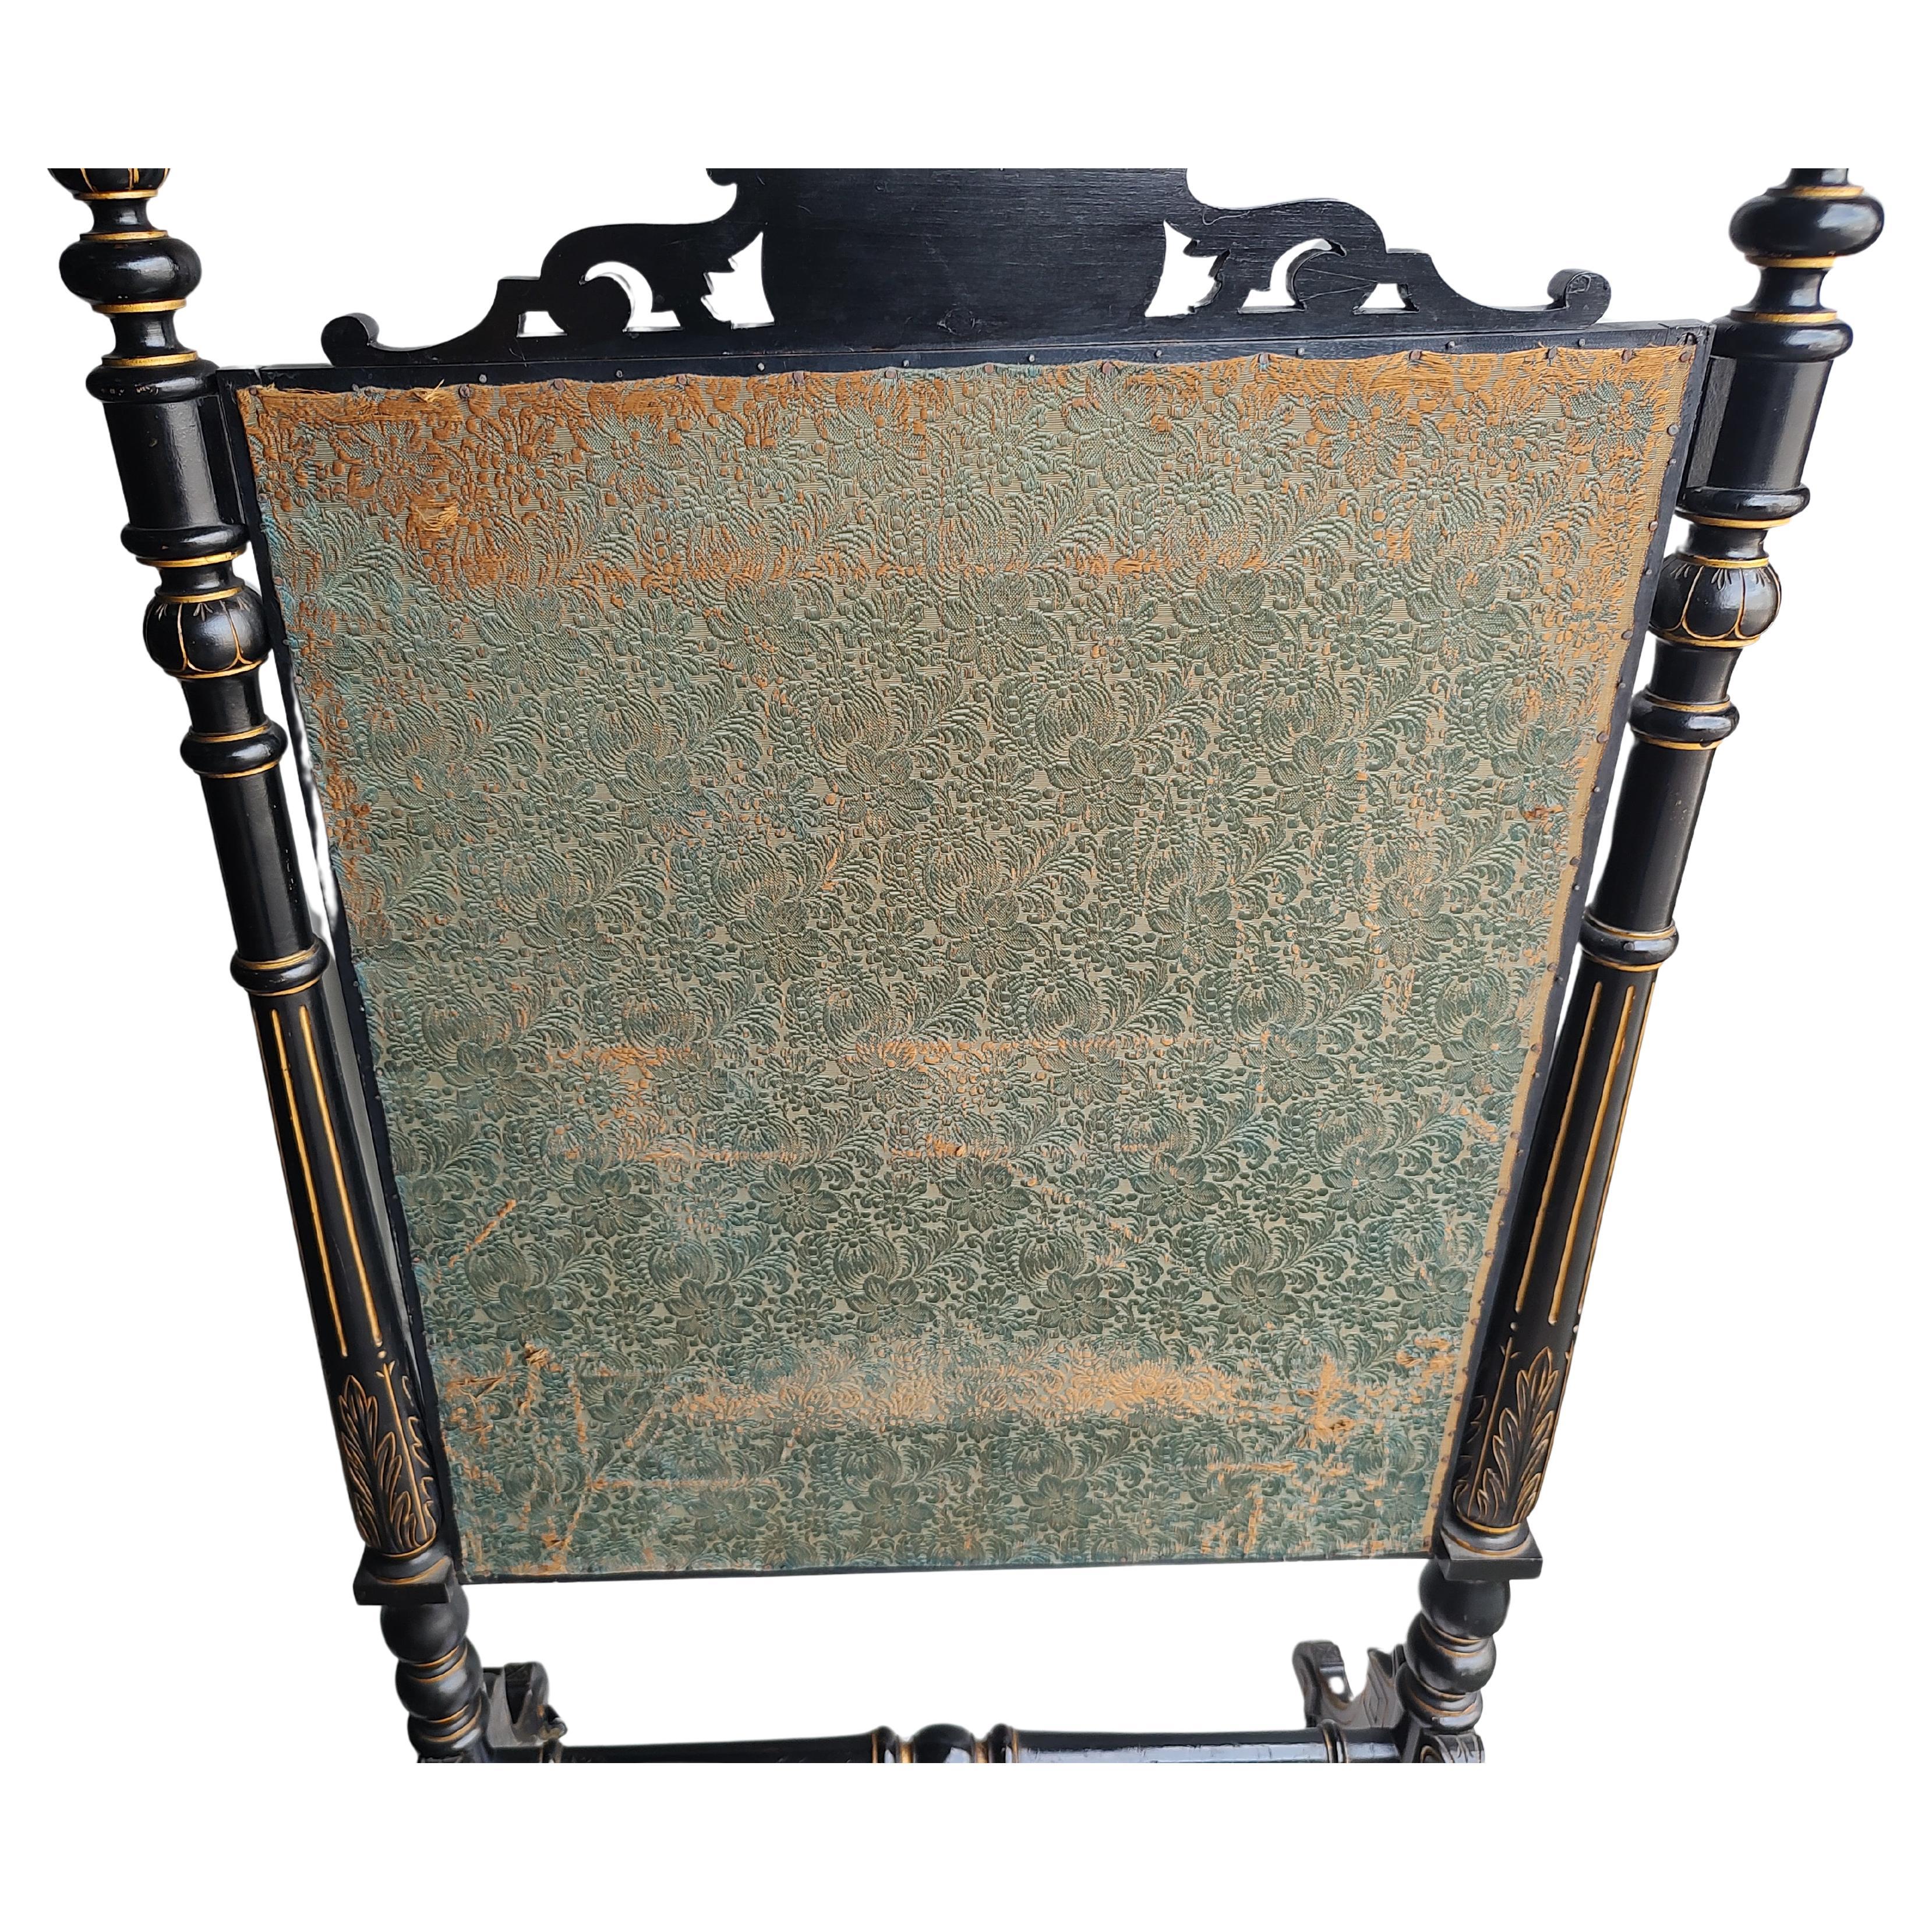 19th C Large Renaissance Revival Black Lacquer & Gilt Fireplace Screen Tapestry  For Sale 3